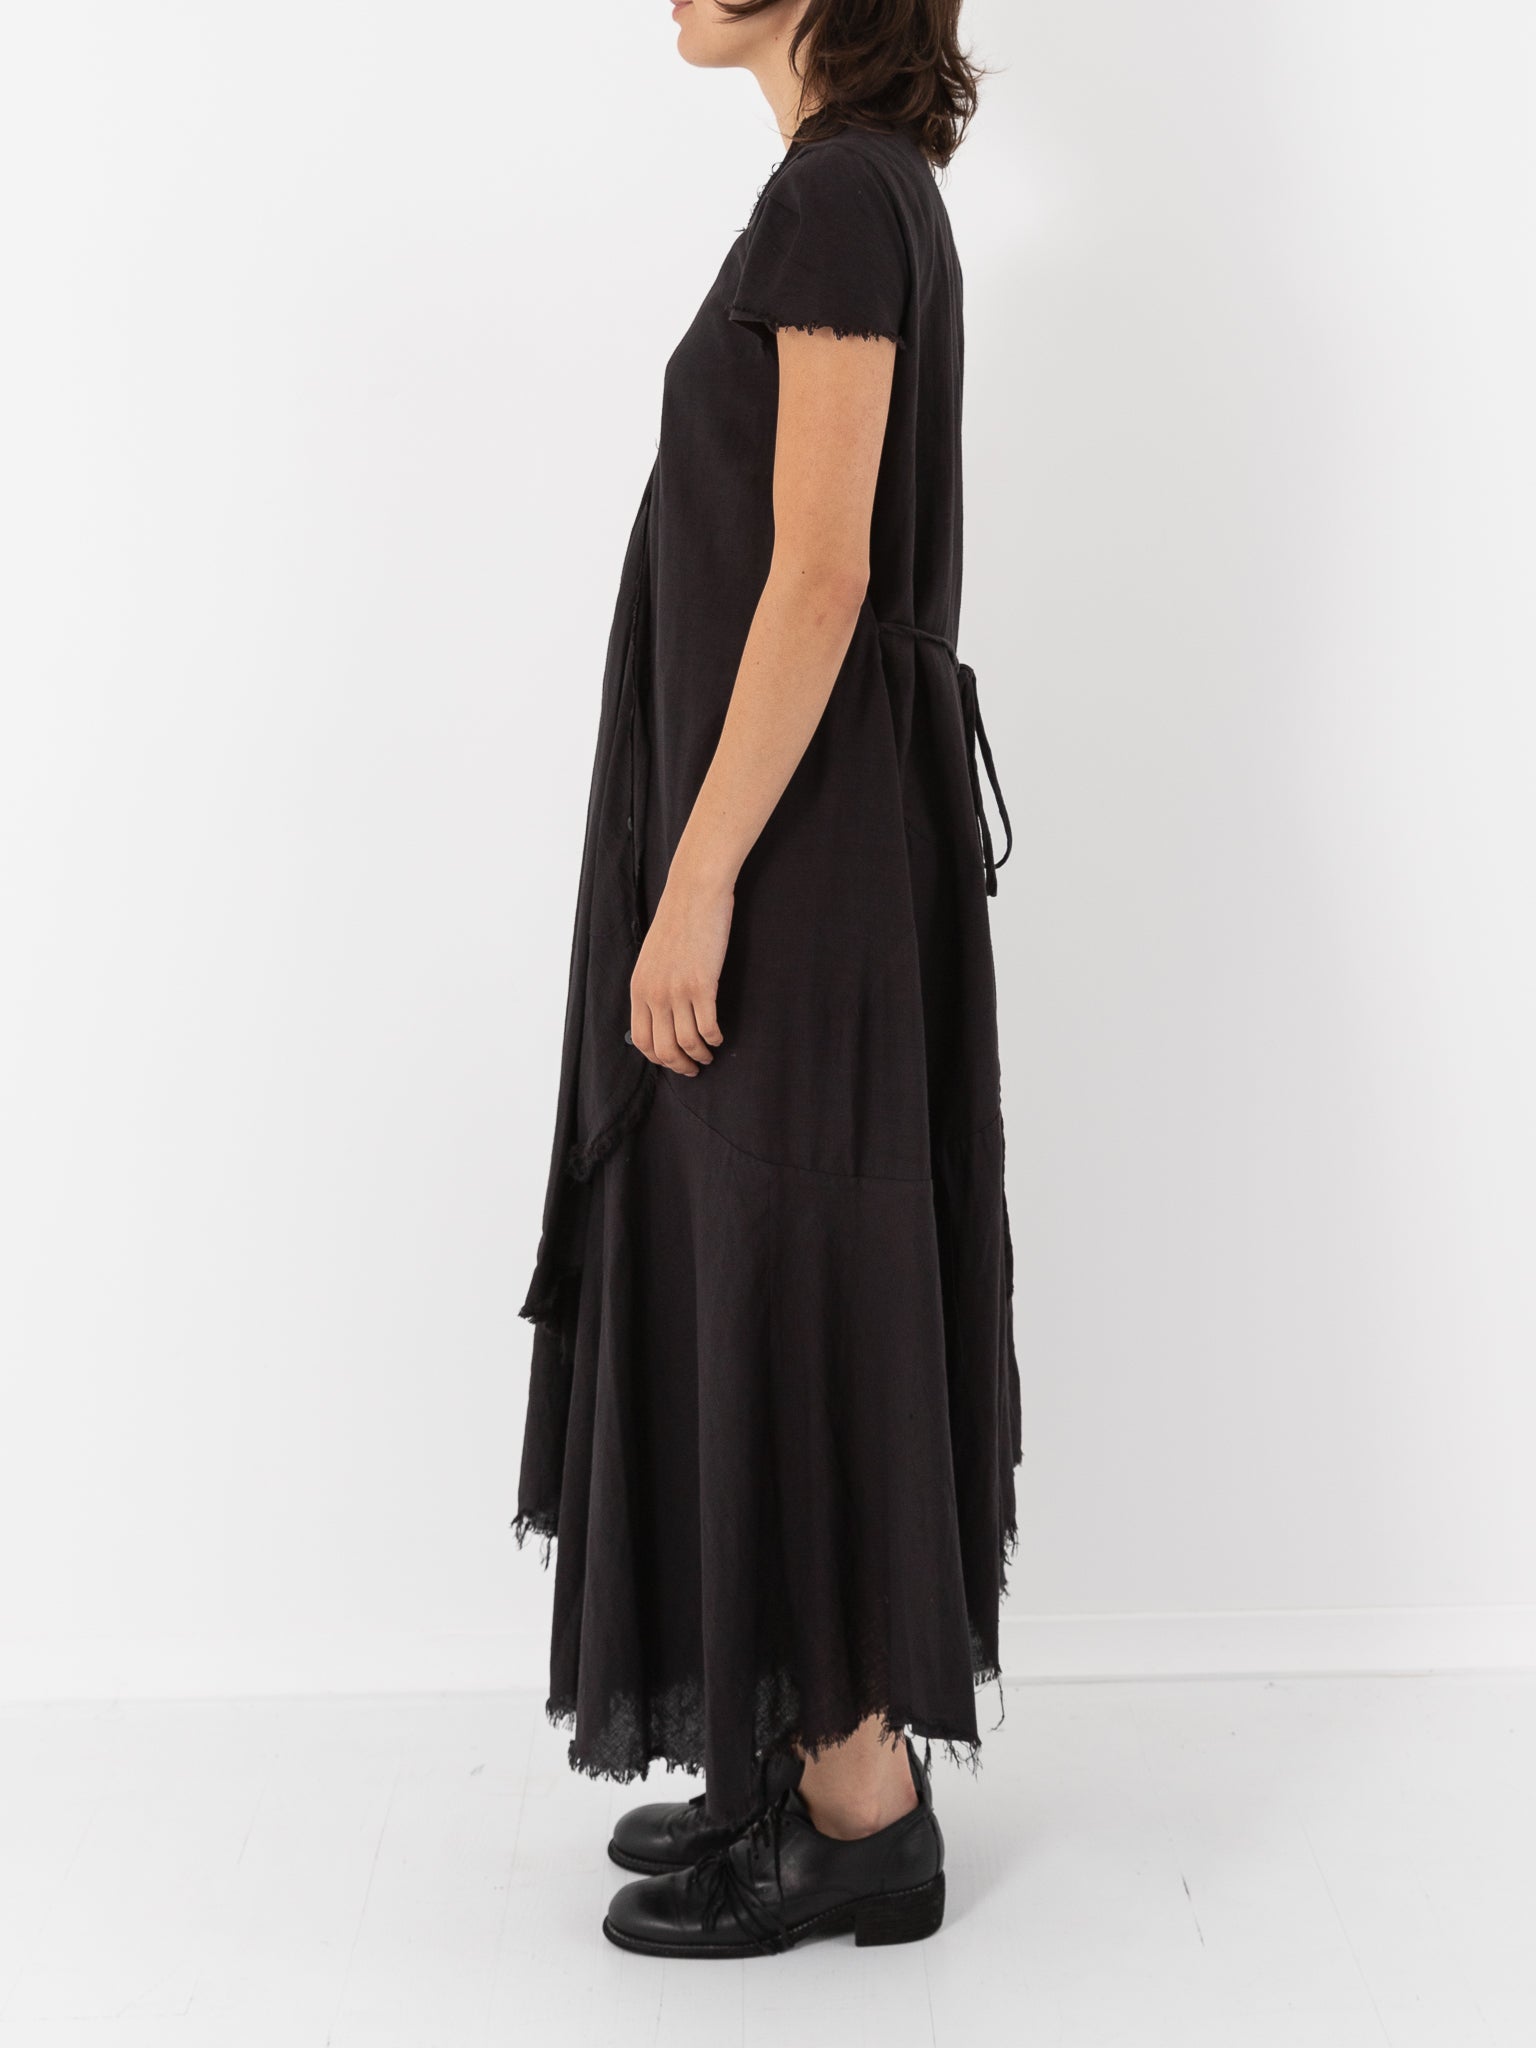 Atelier Suppan Flared Dress, Black - Worthwhile